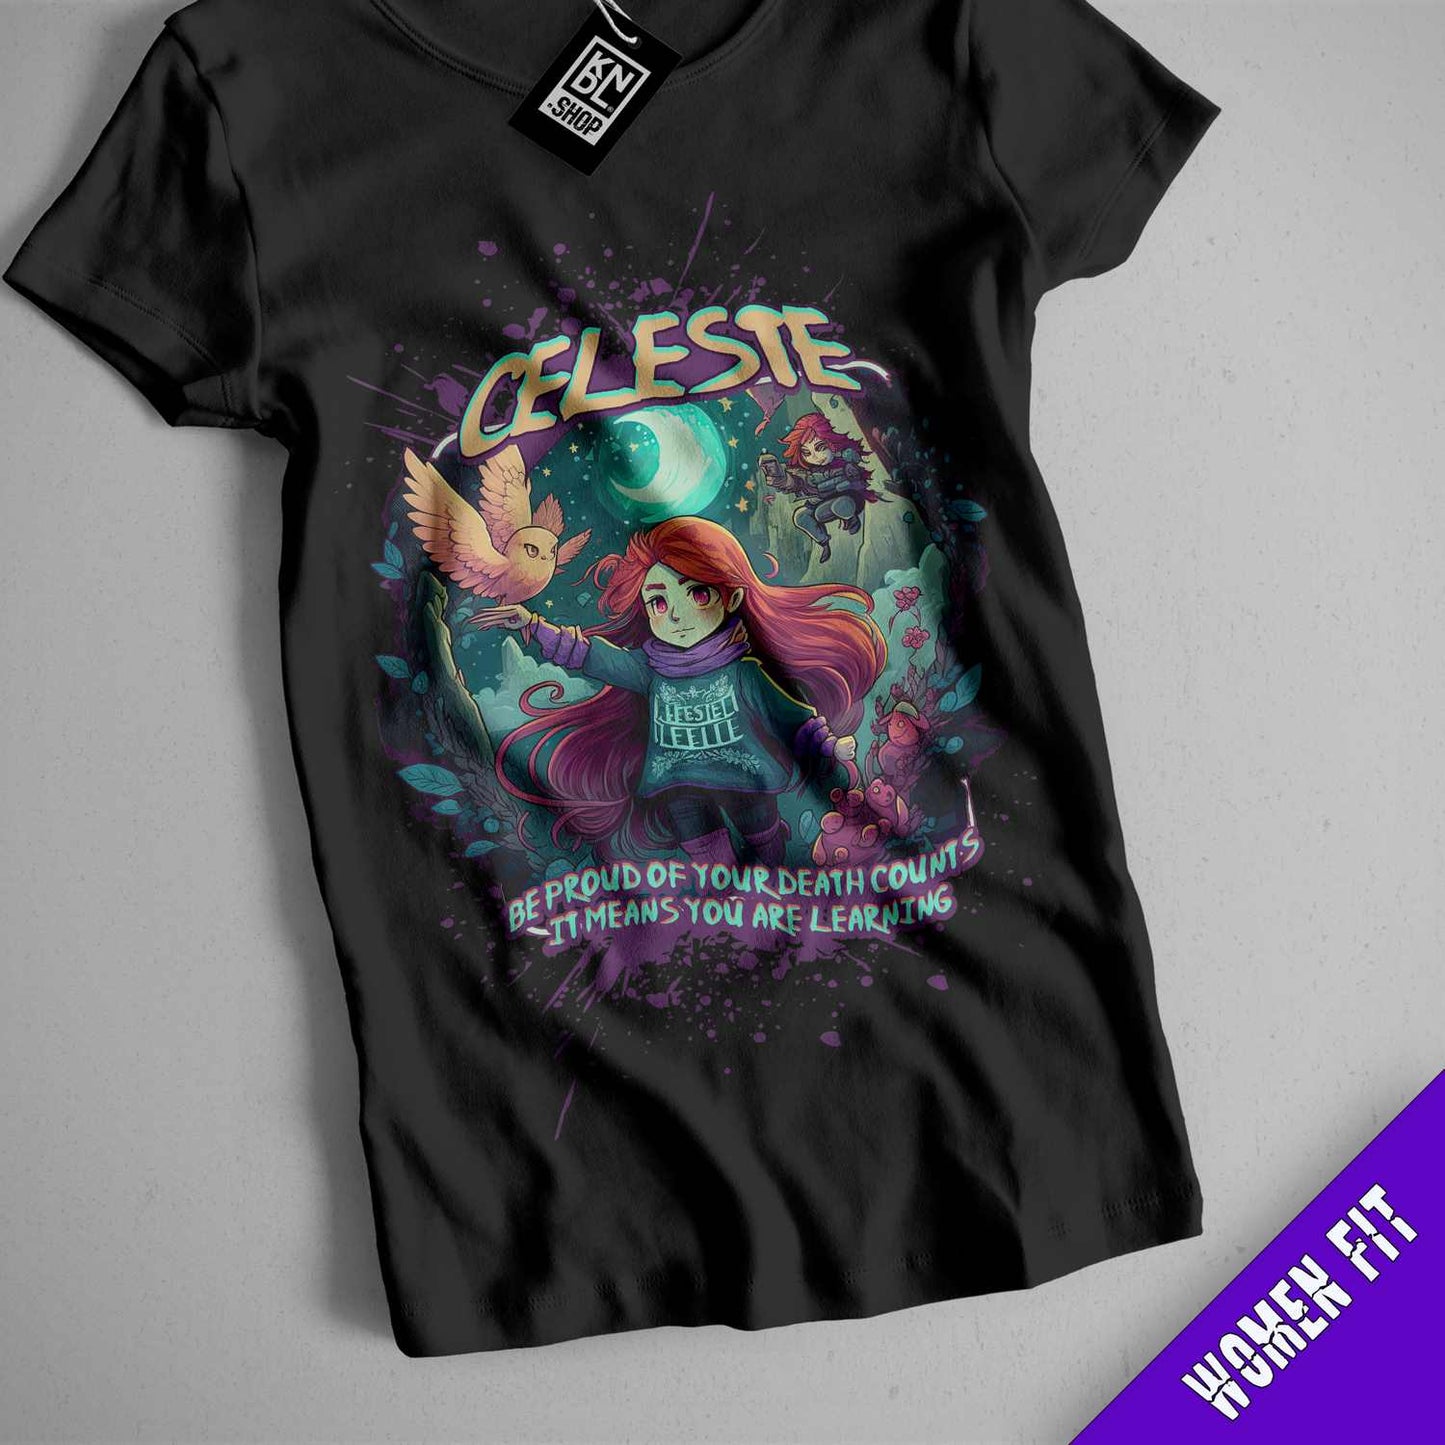 a black t - shirt with a picture of a little mermaid on it